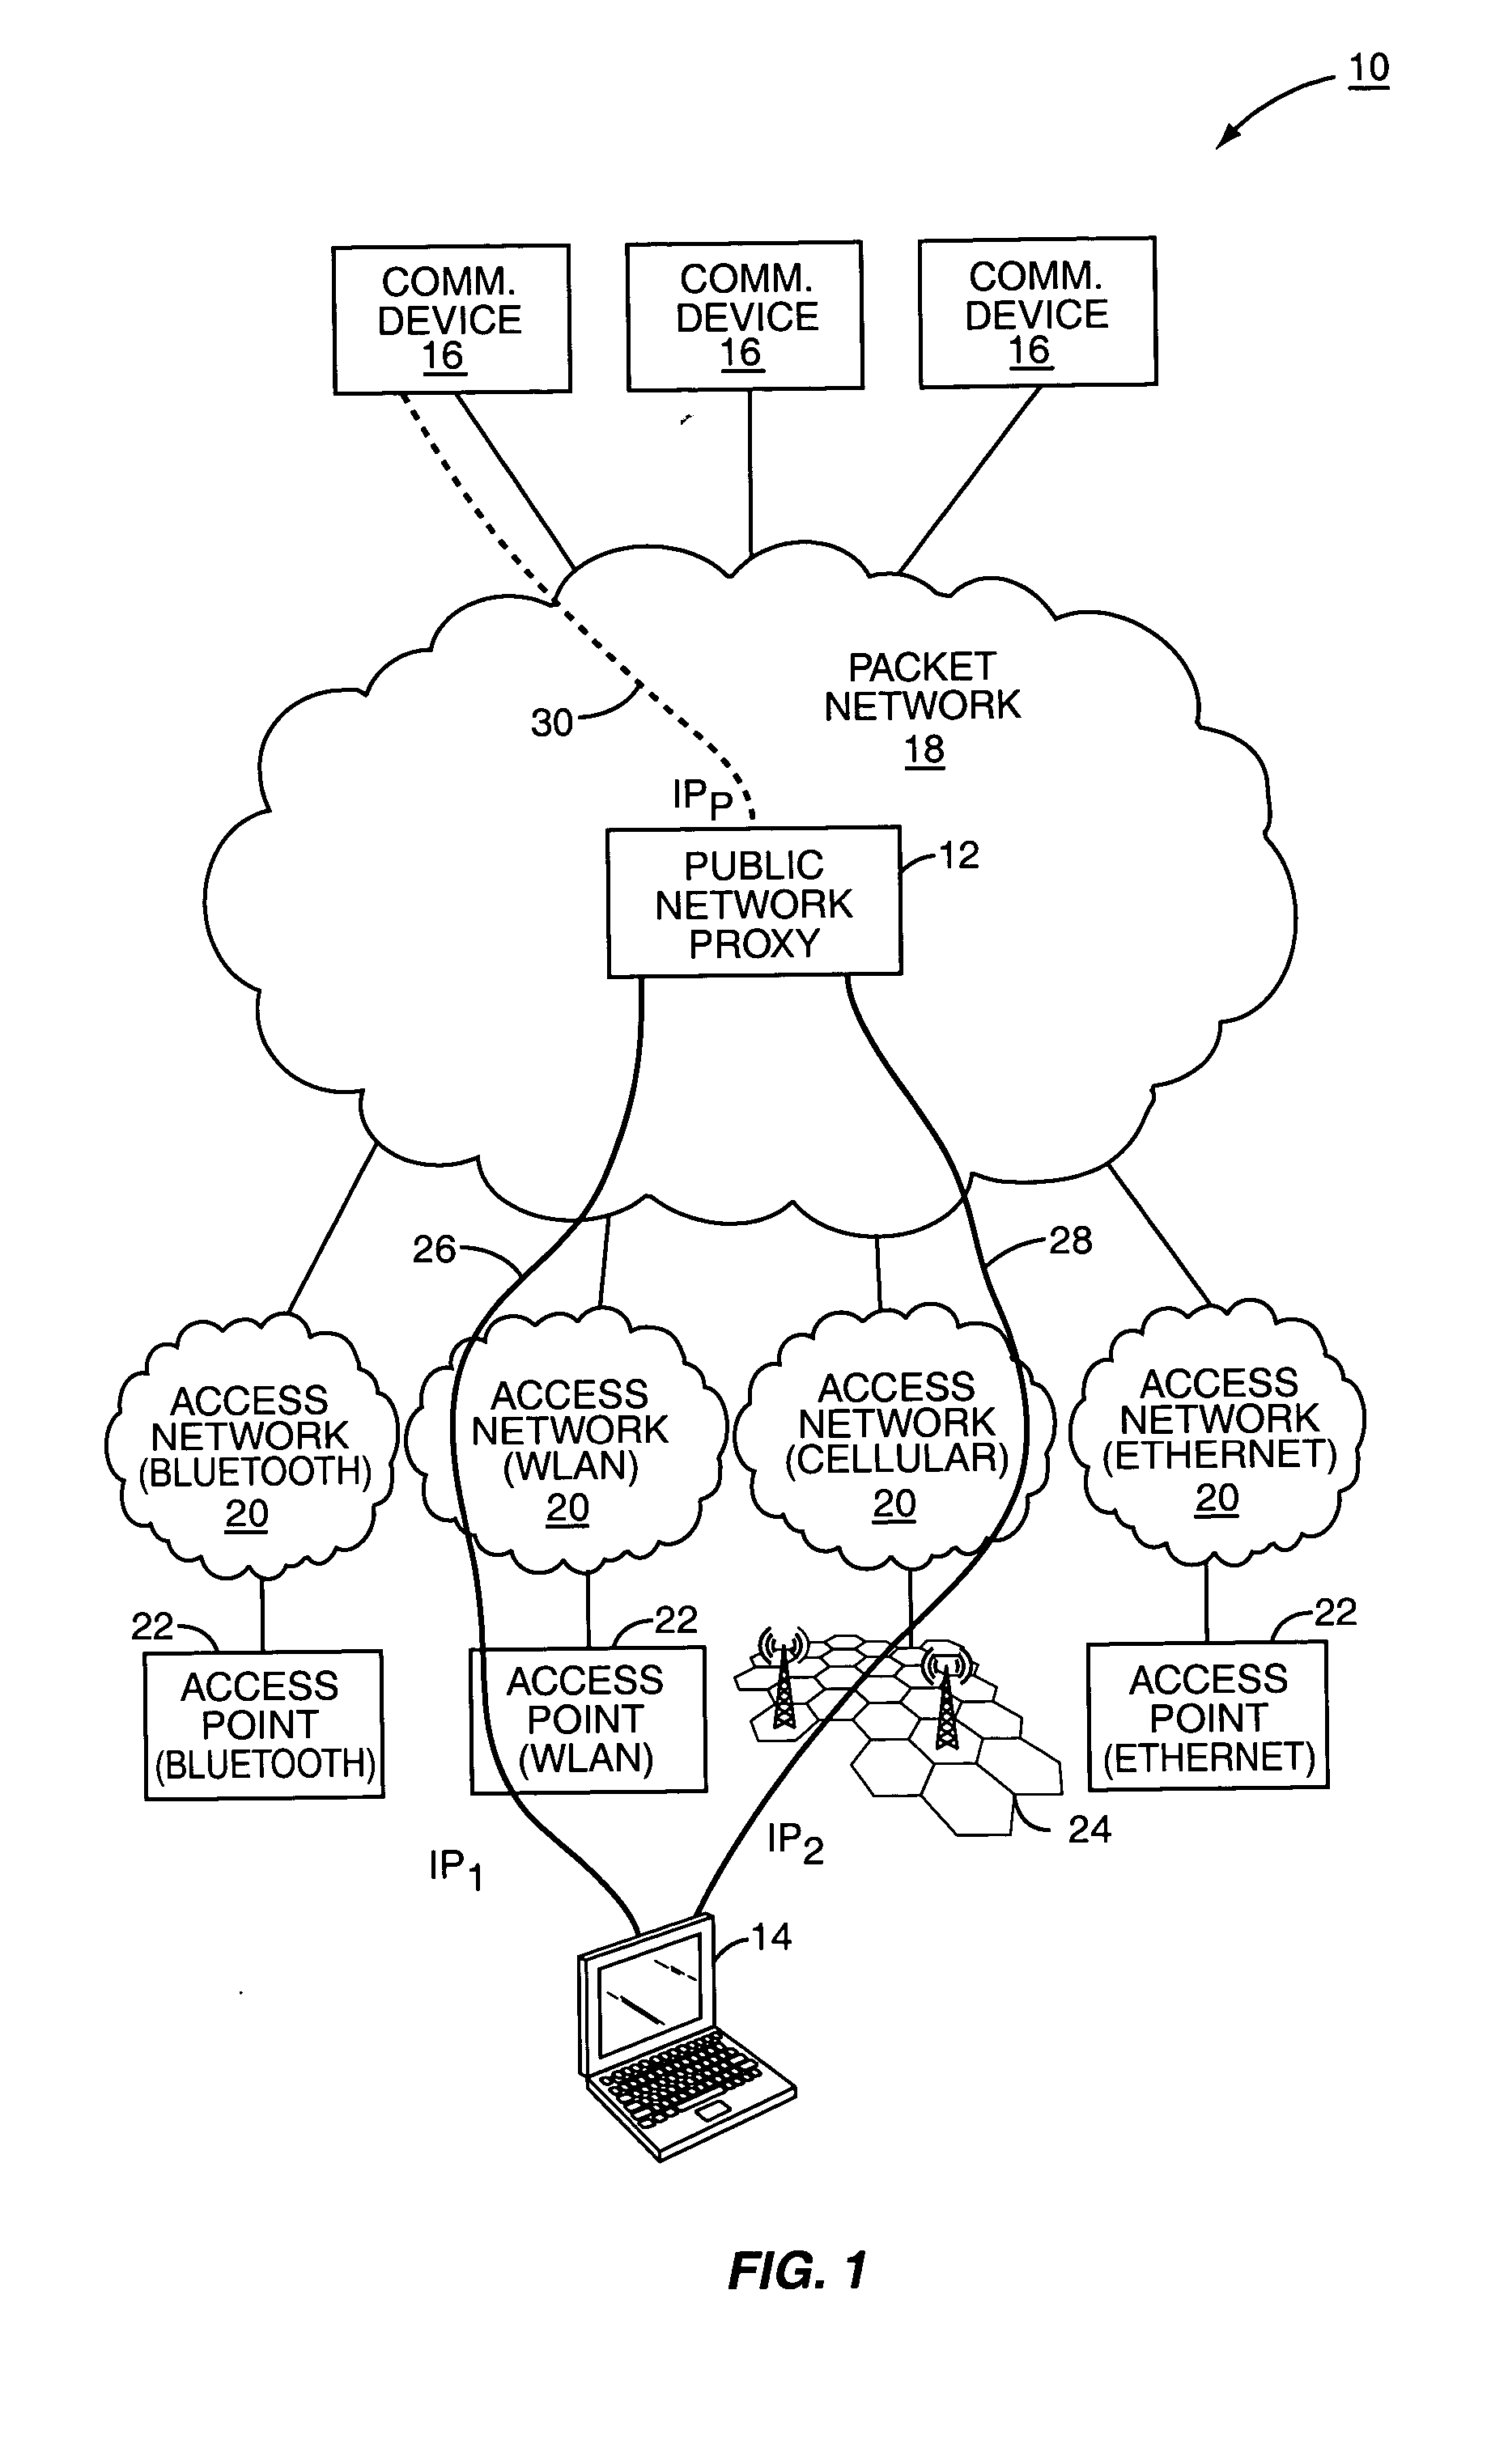 Mobility in a multi-access communication network